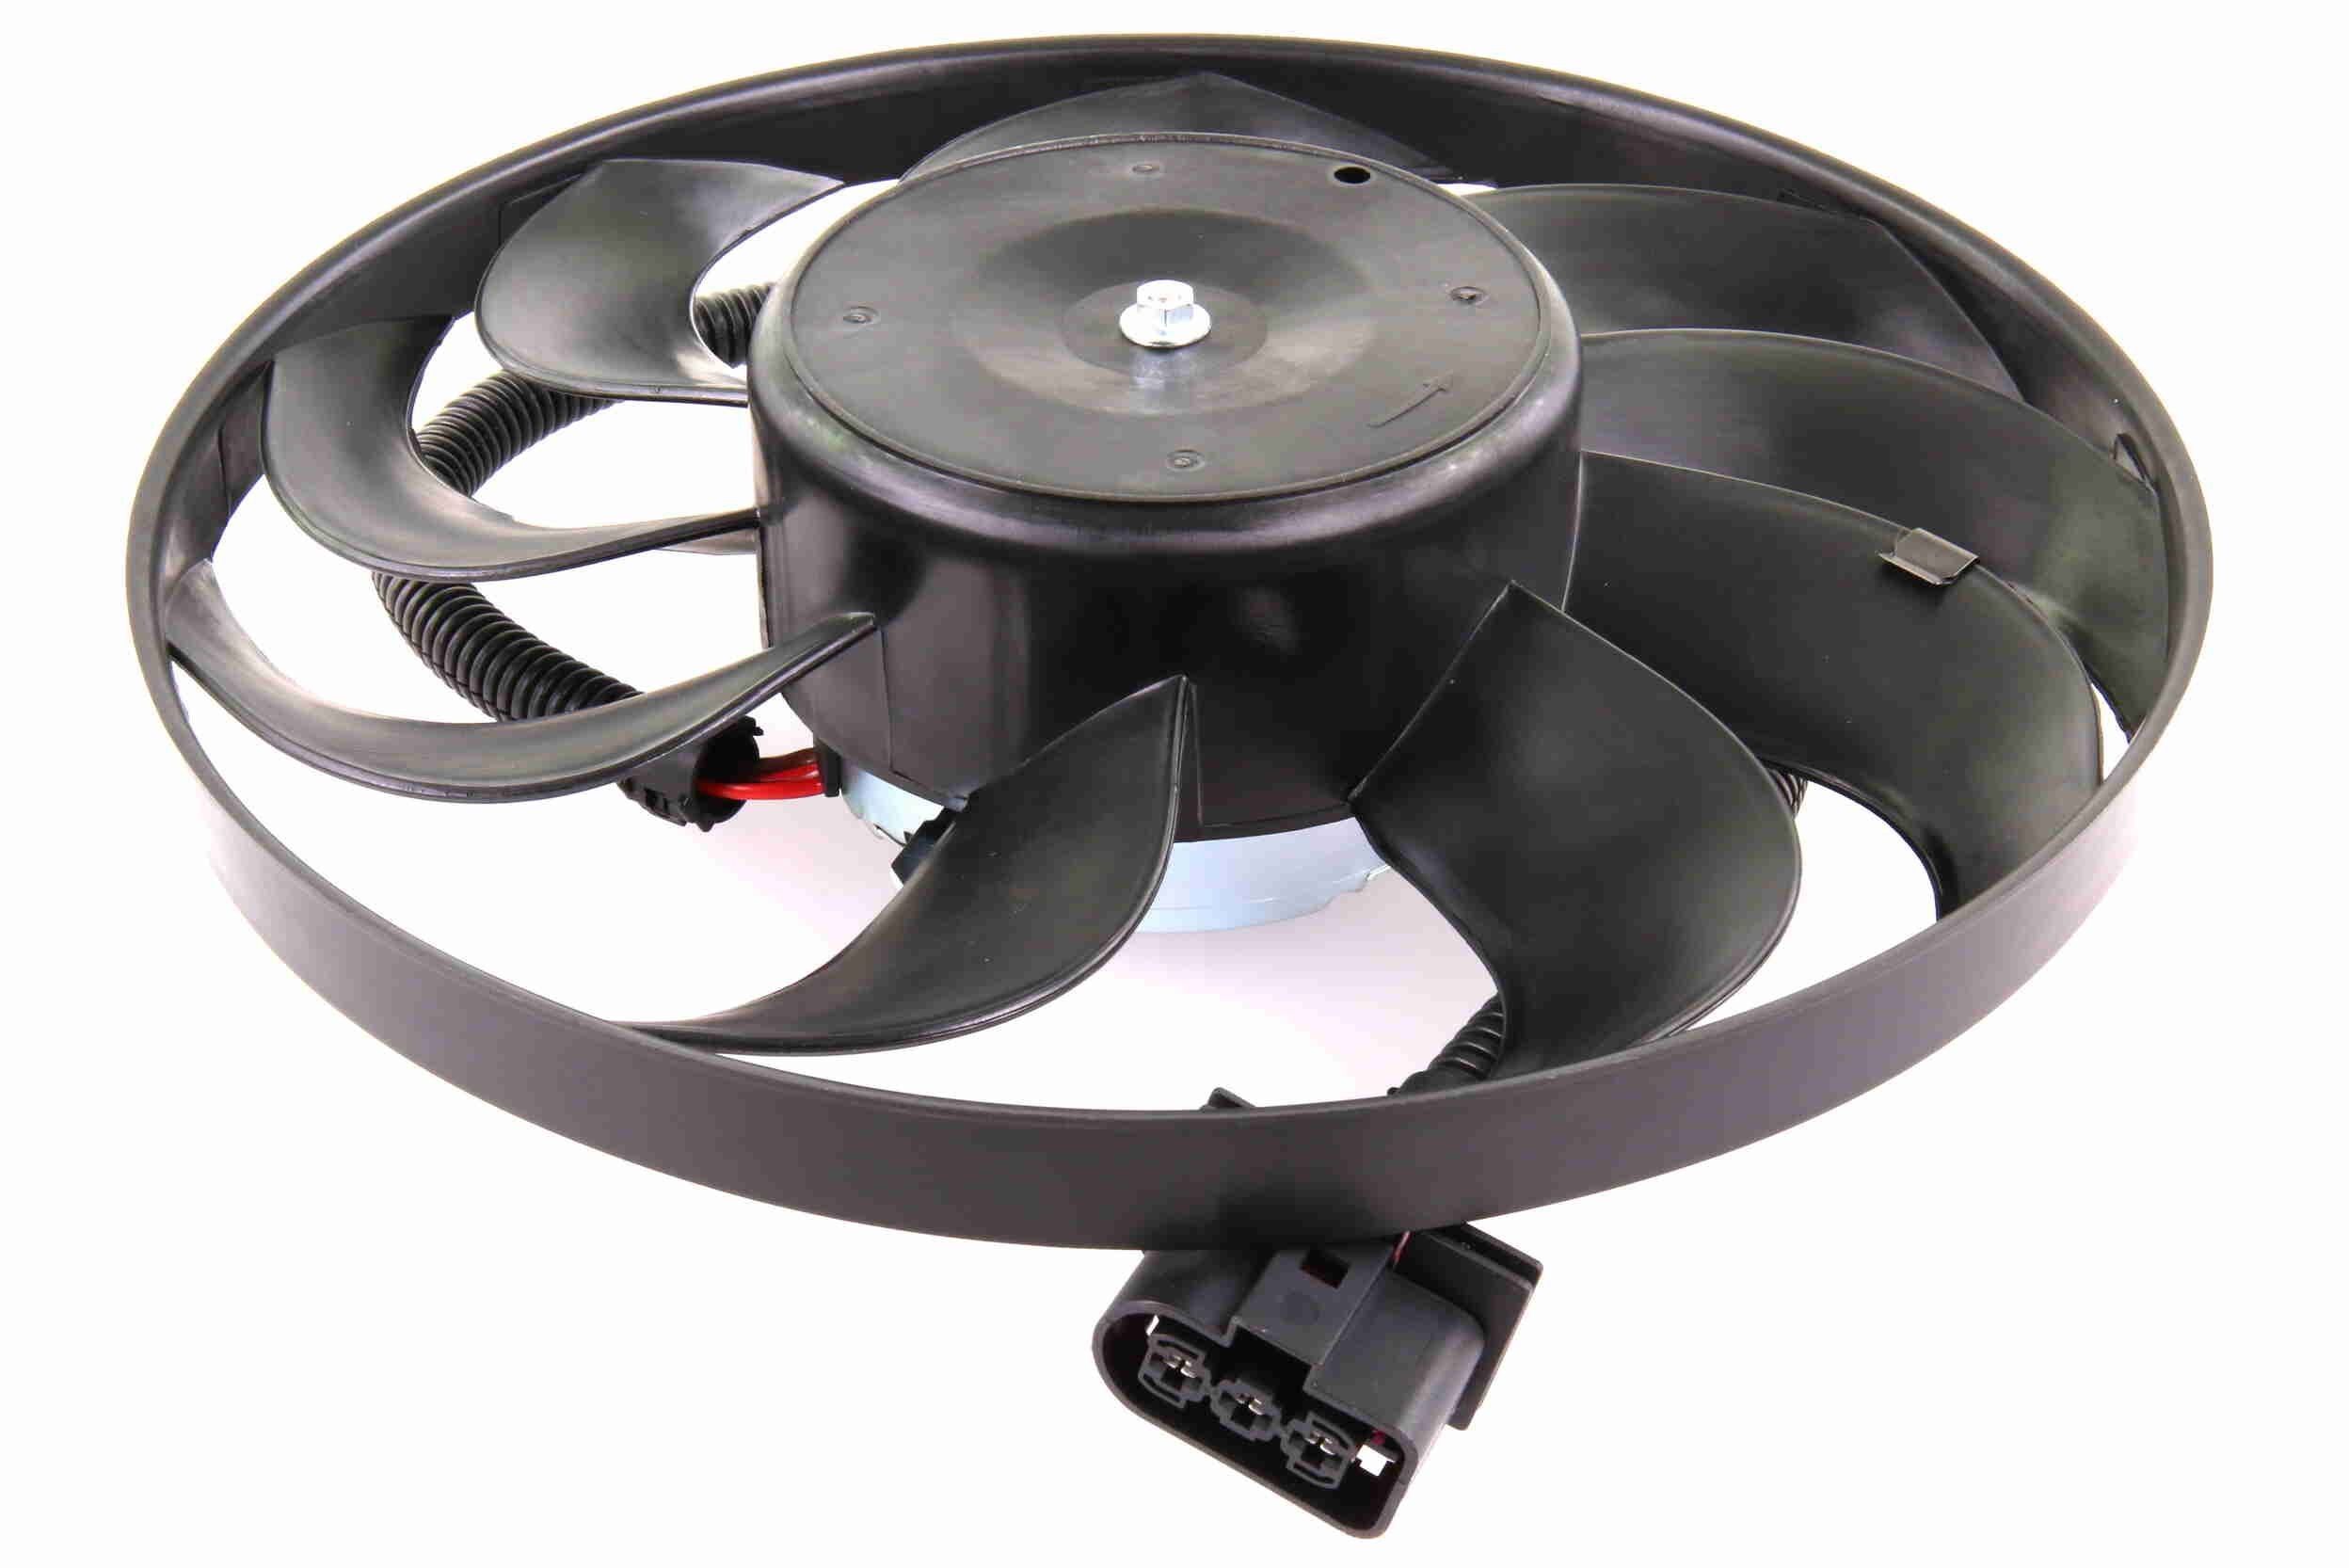 Mercedes A-Class Cooling fan 2291078 VEMO V15-01-1834-1 online buy